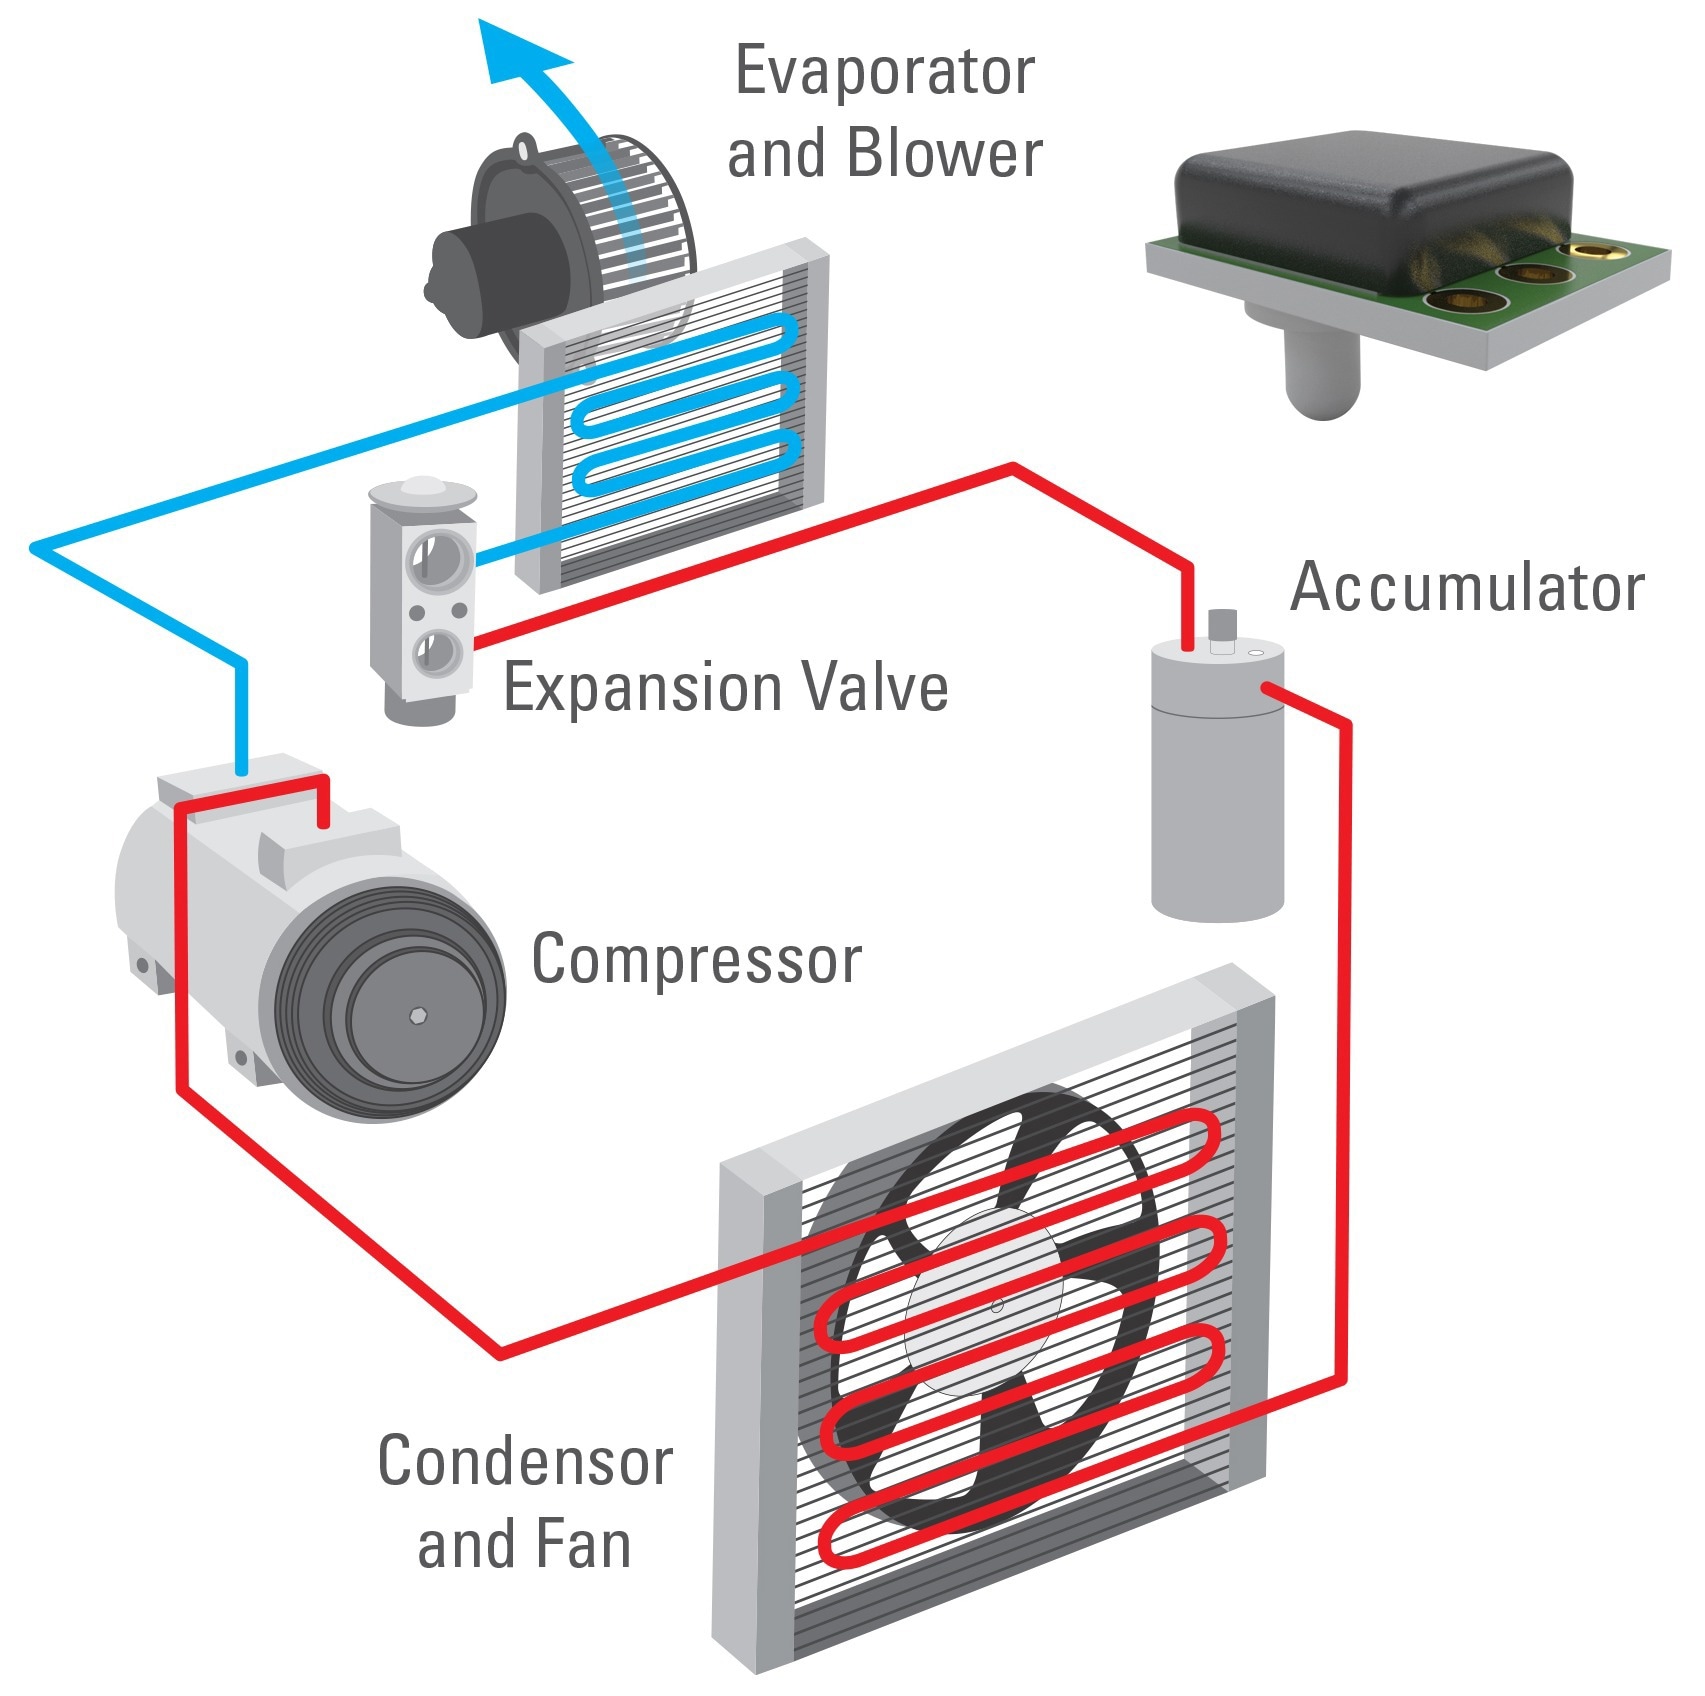 Implementing Pressure Sensors into HVAC Systems